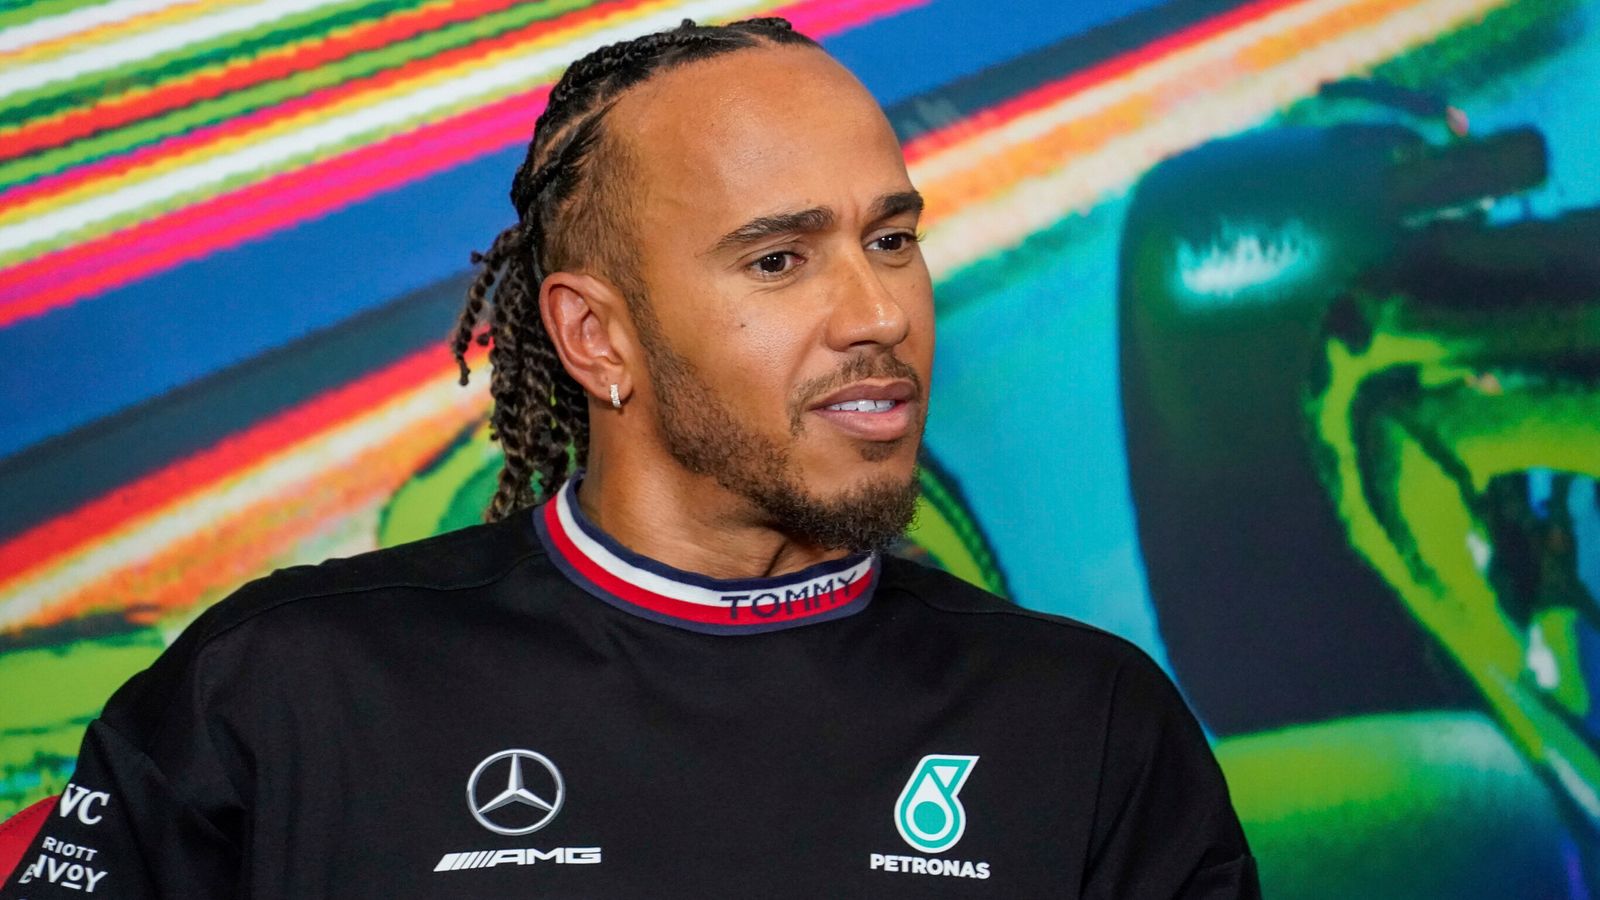 Lewis Hamilton says end to Italian GP brought back Abu Dhabi memories: ‘How the rules should be’